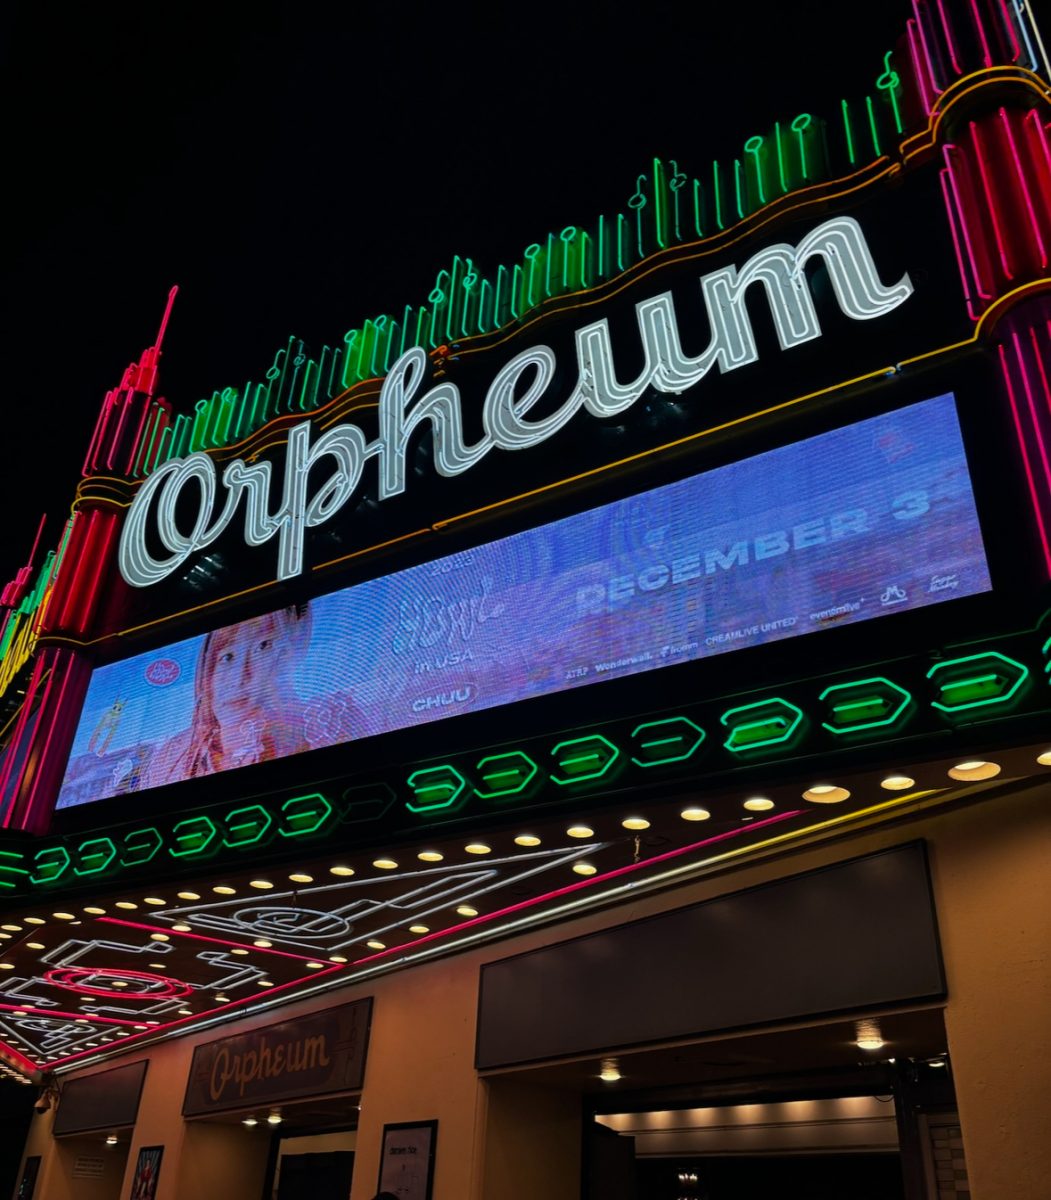 Chuus HOWL Tour in Los Angeles at the Orpheum on December 3.